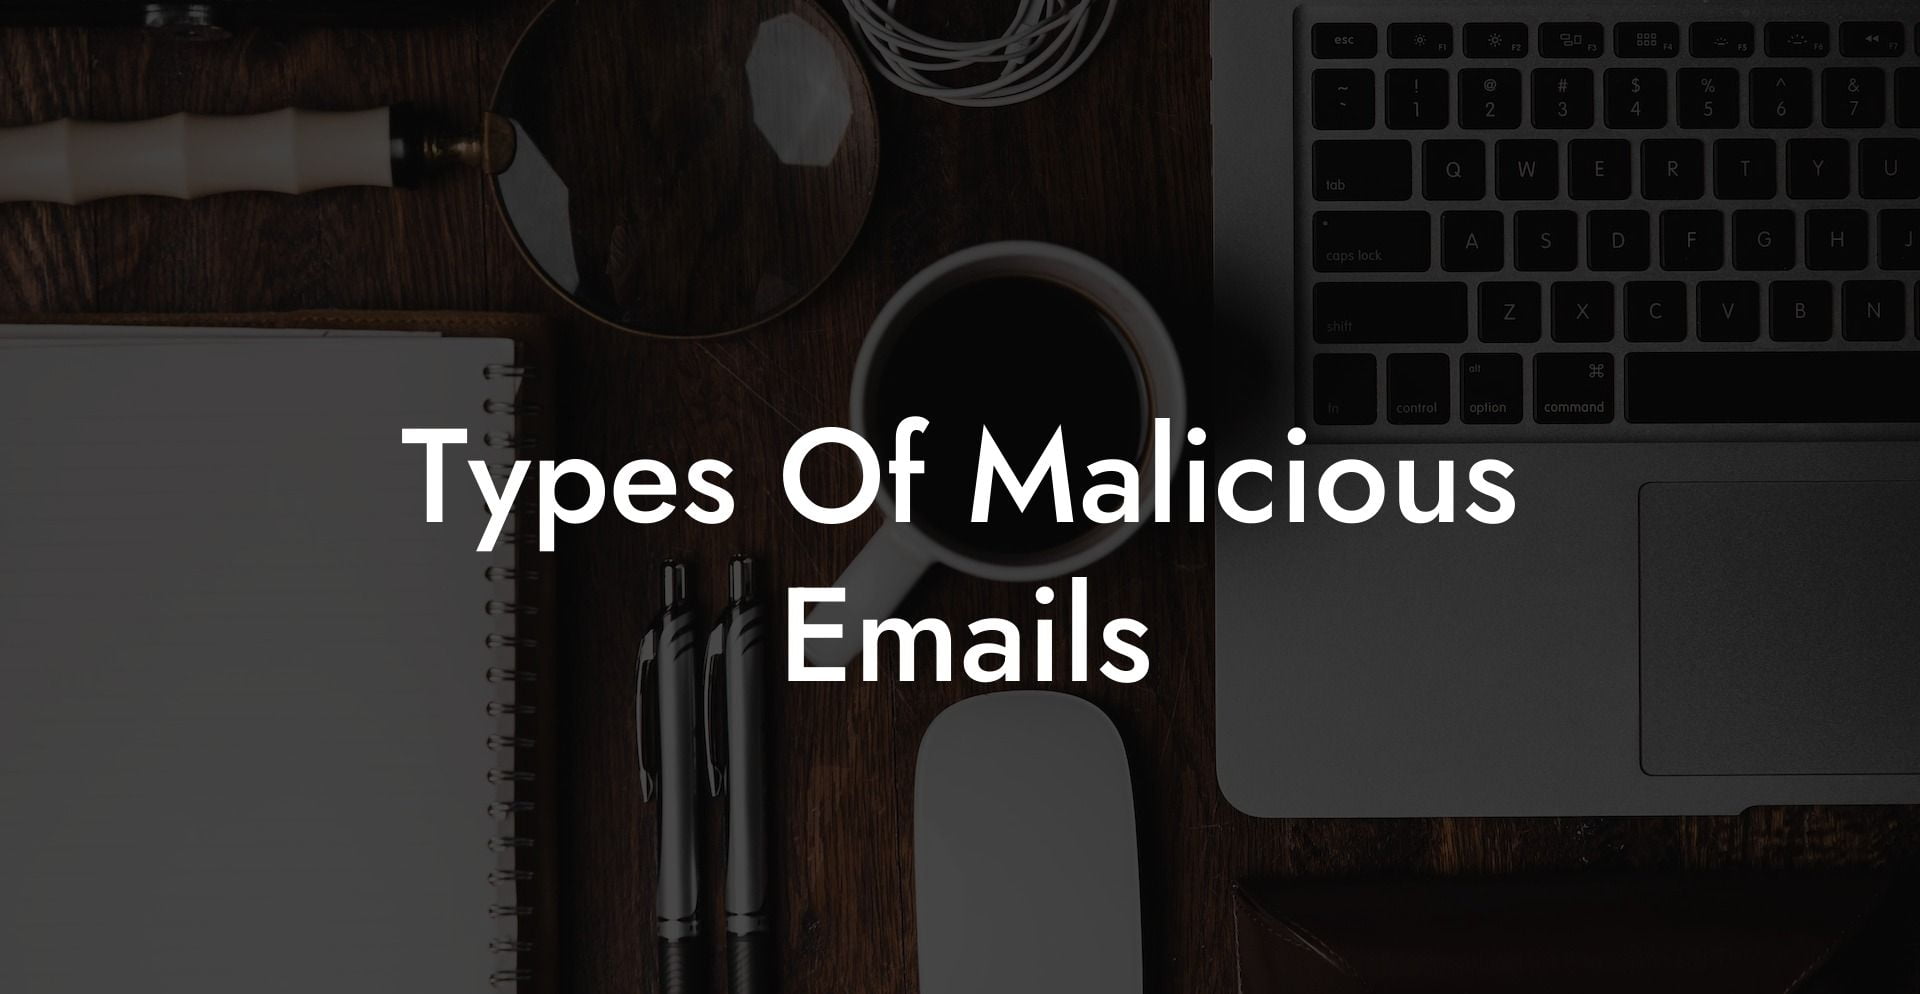 Types Of Malicious Emails